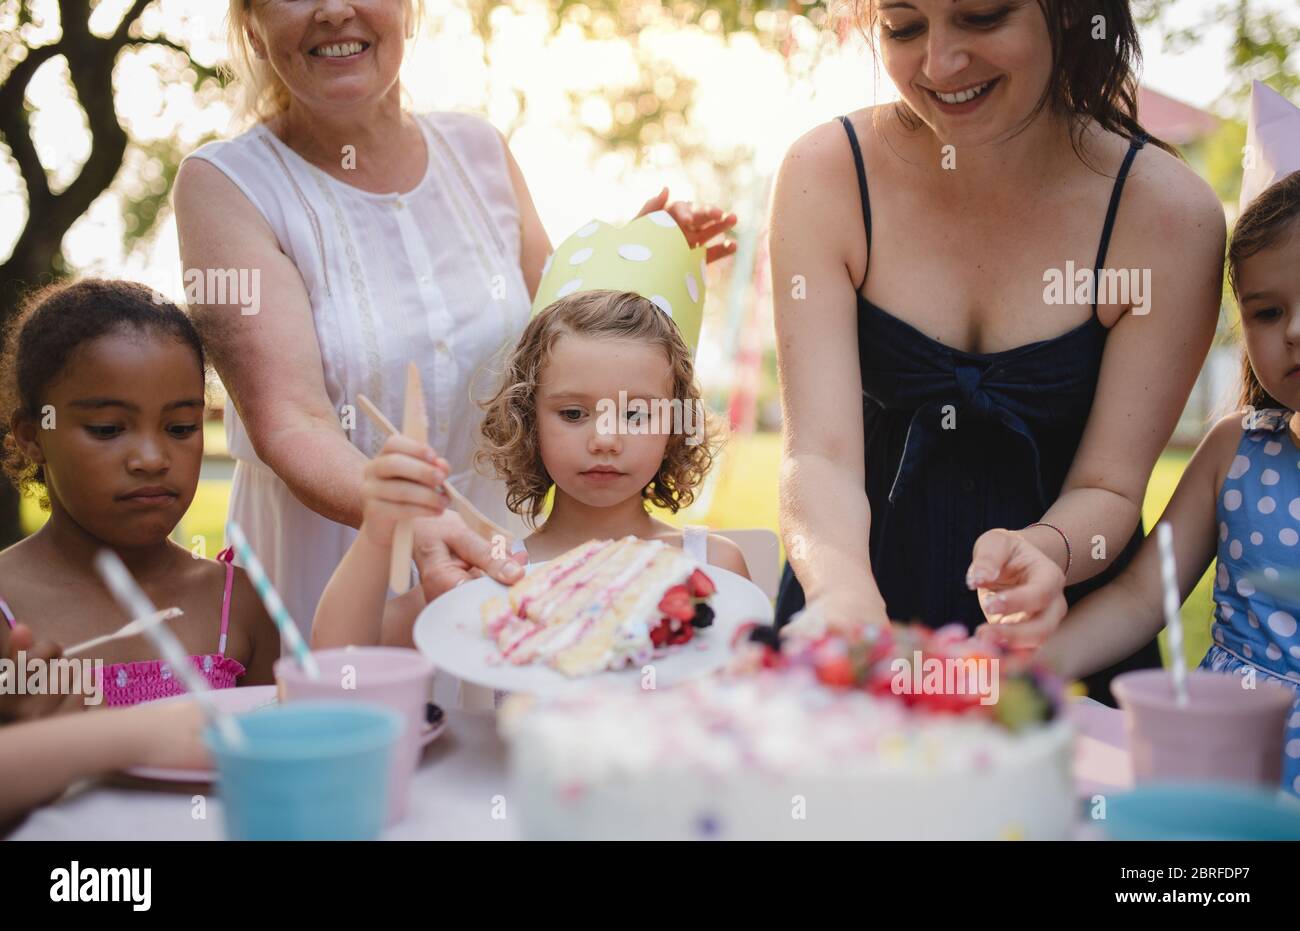 Kids birthday party outdoors in garden in summer, celebration concept. Stock Photo